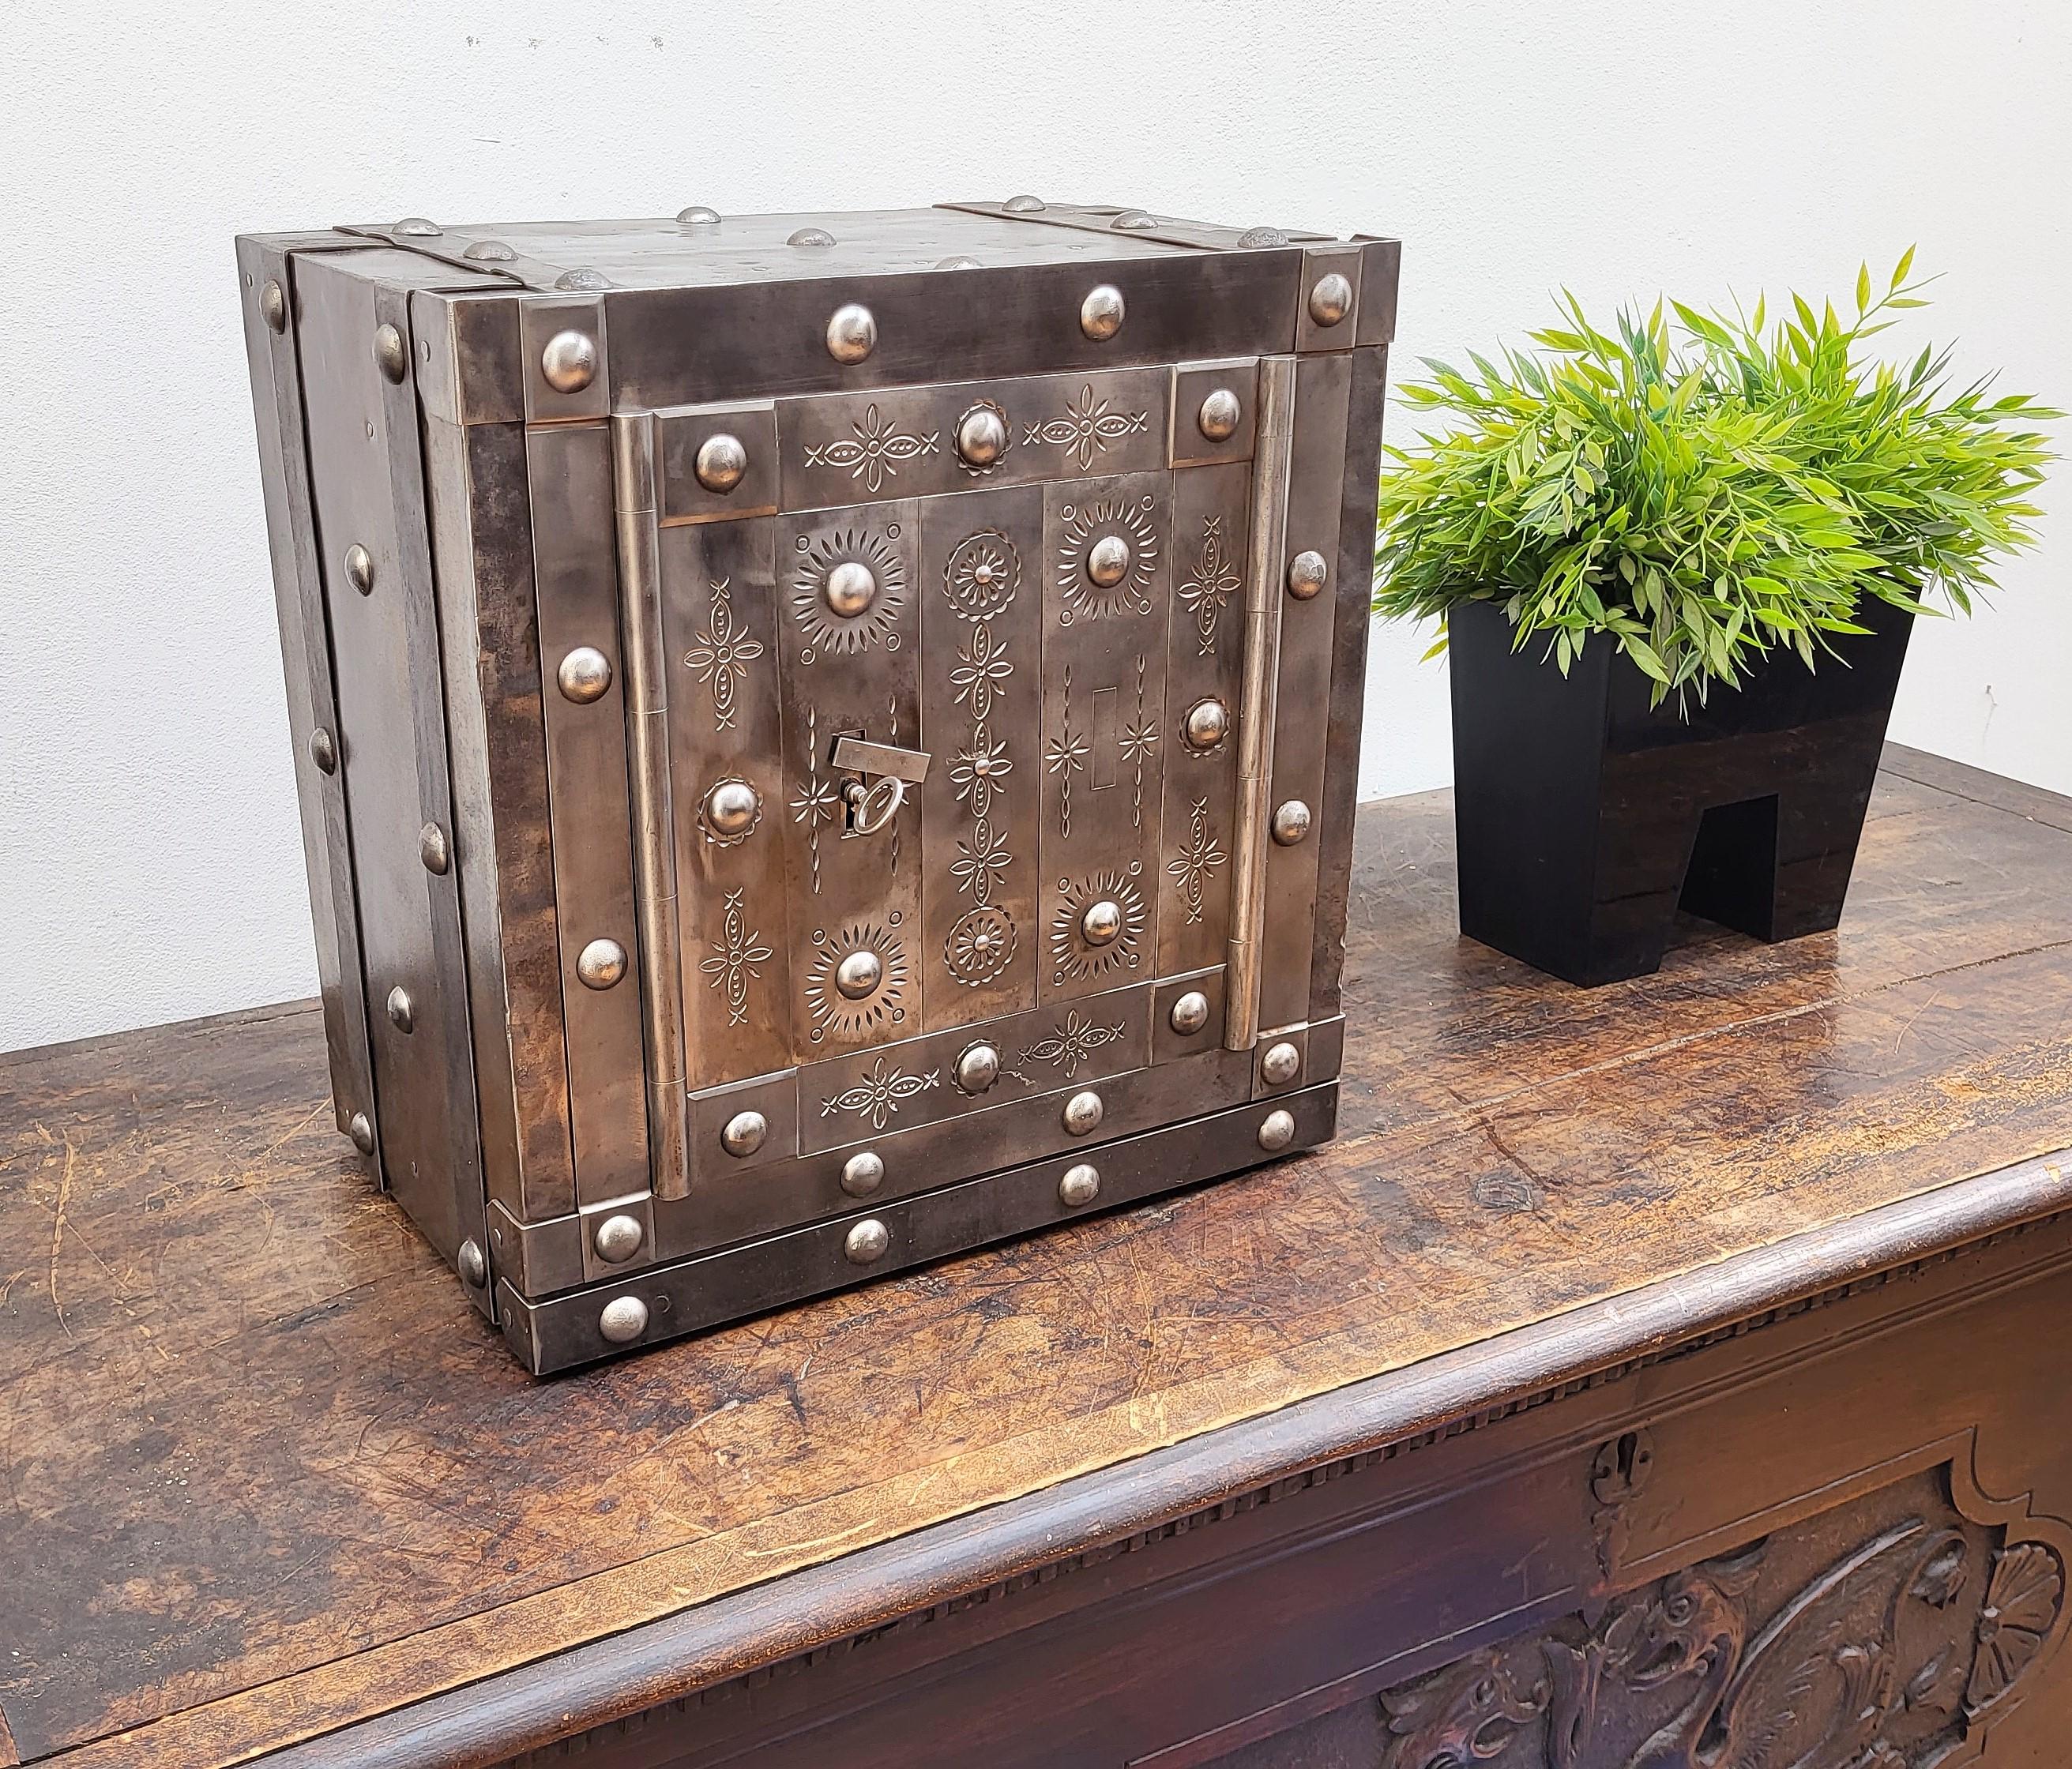 This beautiful Italian antique safe is a collector piece with typical all-around hobnails, dated circa 1790-1820, has a great metal color with patina of time and amazingly rich decorations, characterized by the central door with great burin incision